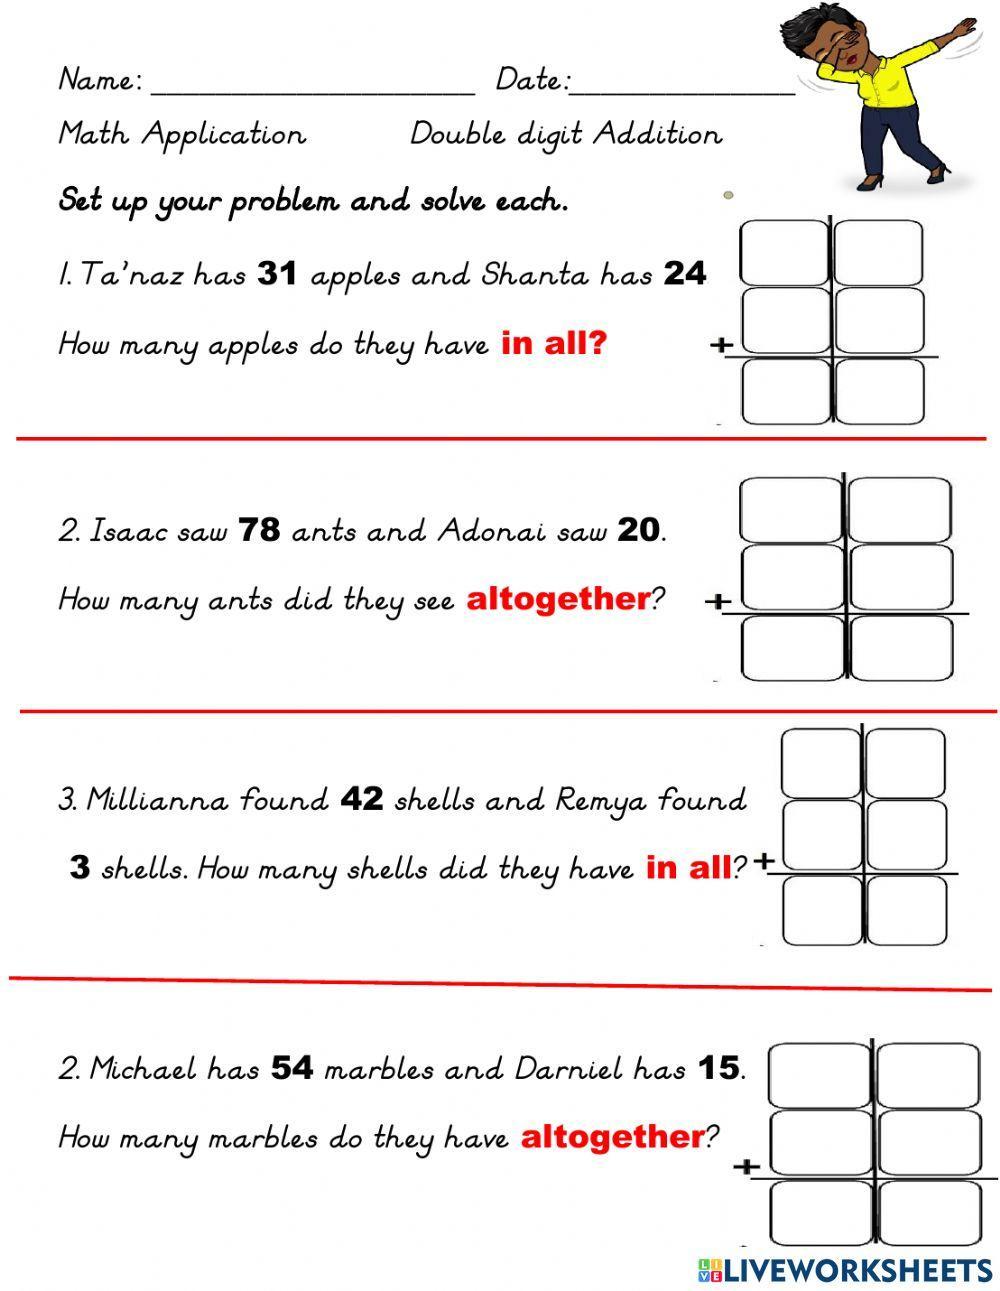 Double digit addition word problems